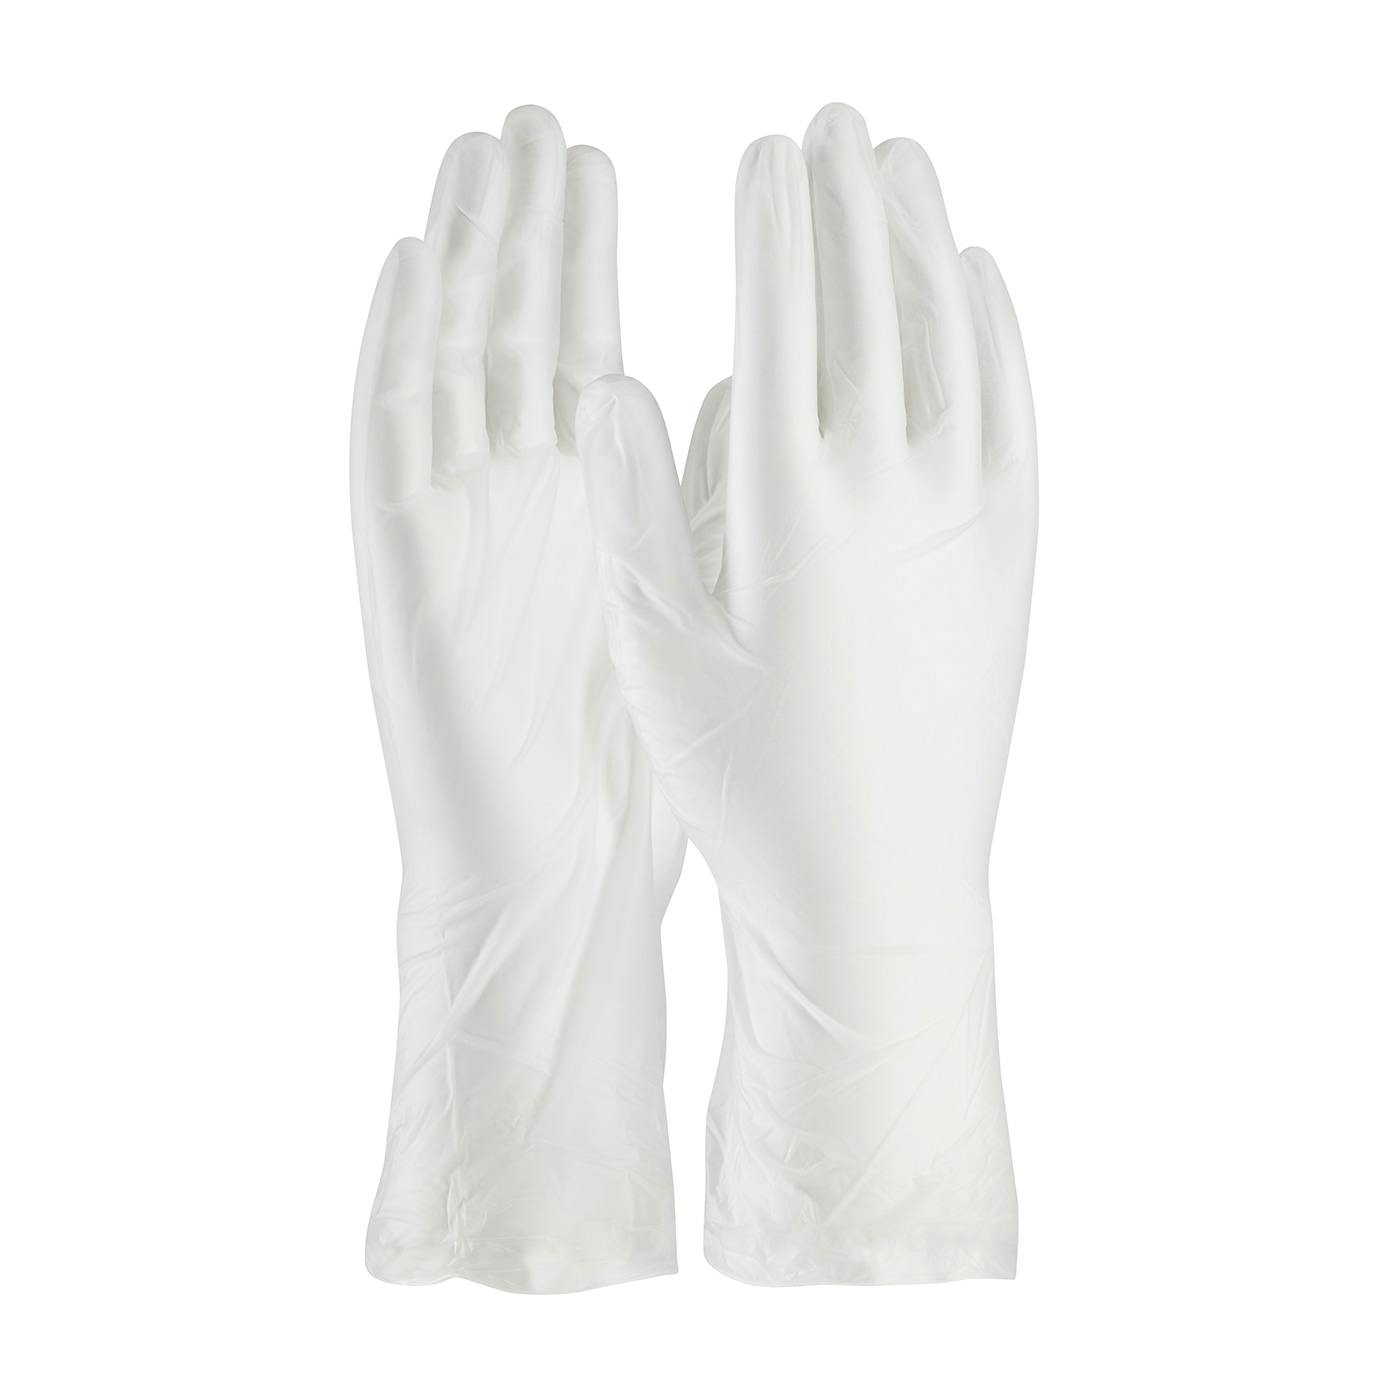 CleanTeam® Single Use Class 100 Cleanroom Vinyl Glove with Finger Textured Grip - 12" (100-2830)